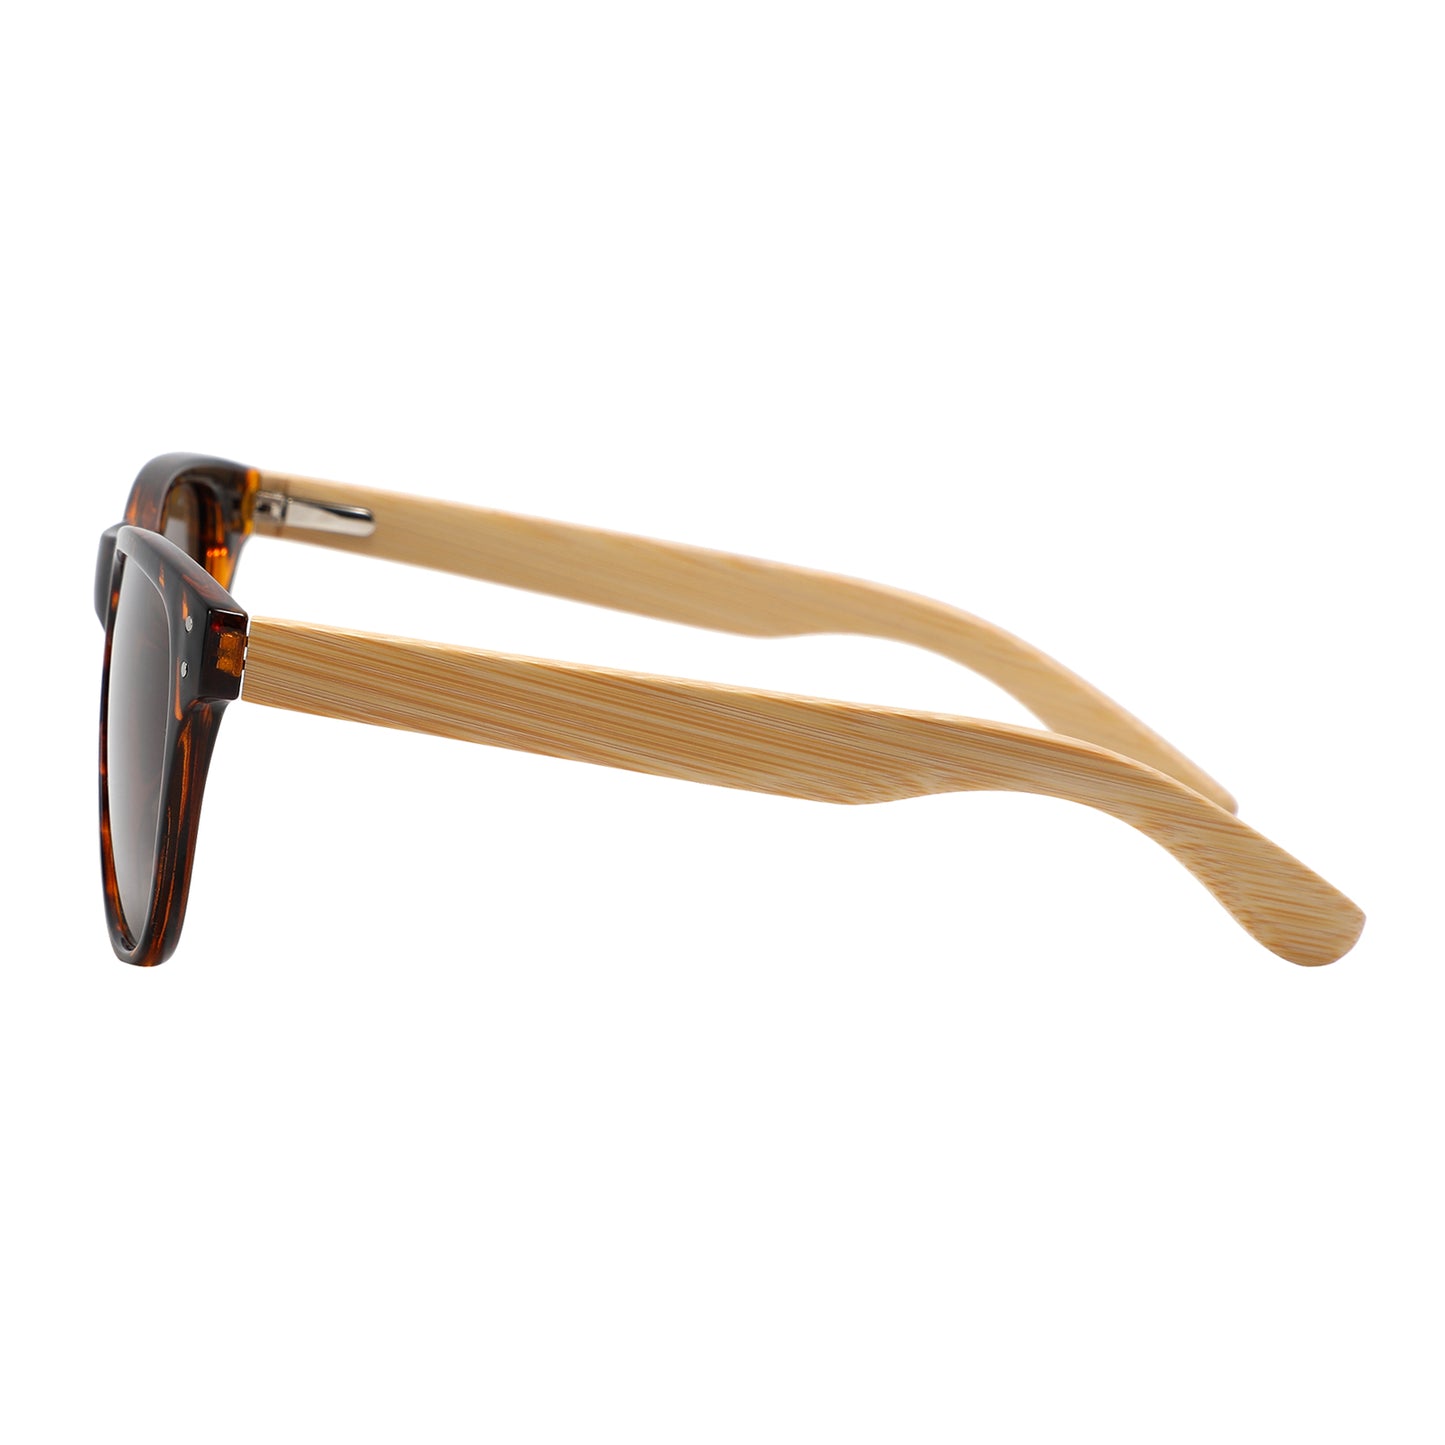 LEXI TS BROWN Ladies Sunglasses Polarised Lens Wooden Arms